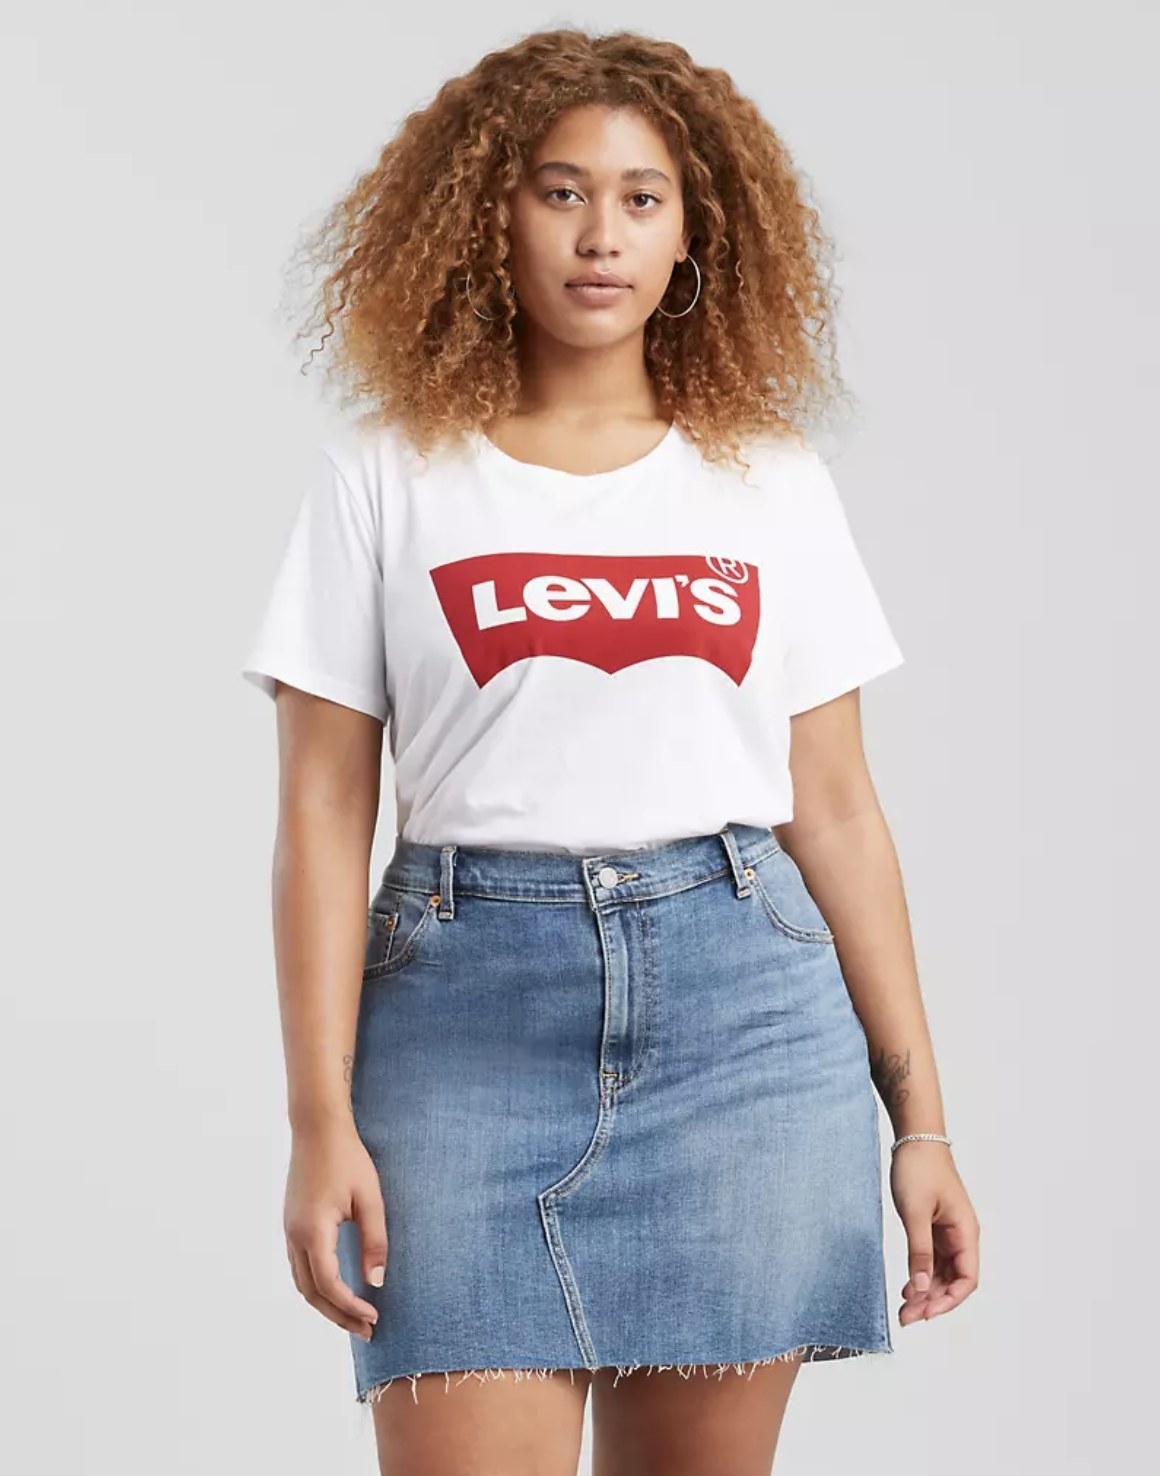 Model is wearing white tee with the Levi&#x27;s logo and a denim skirt